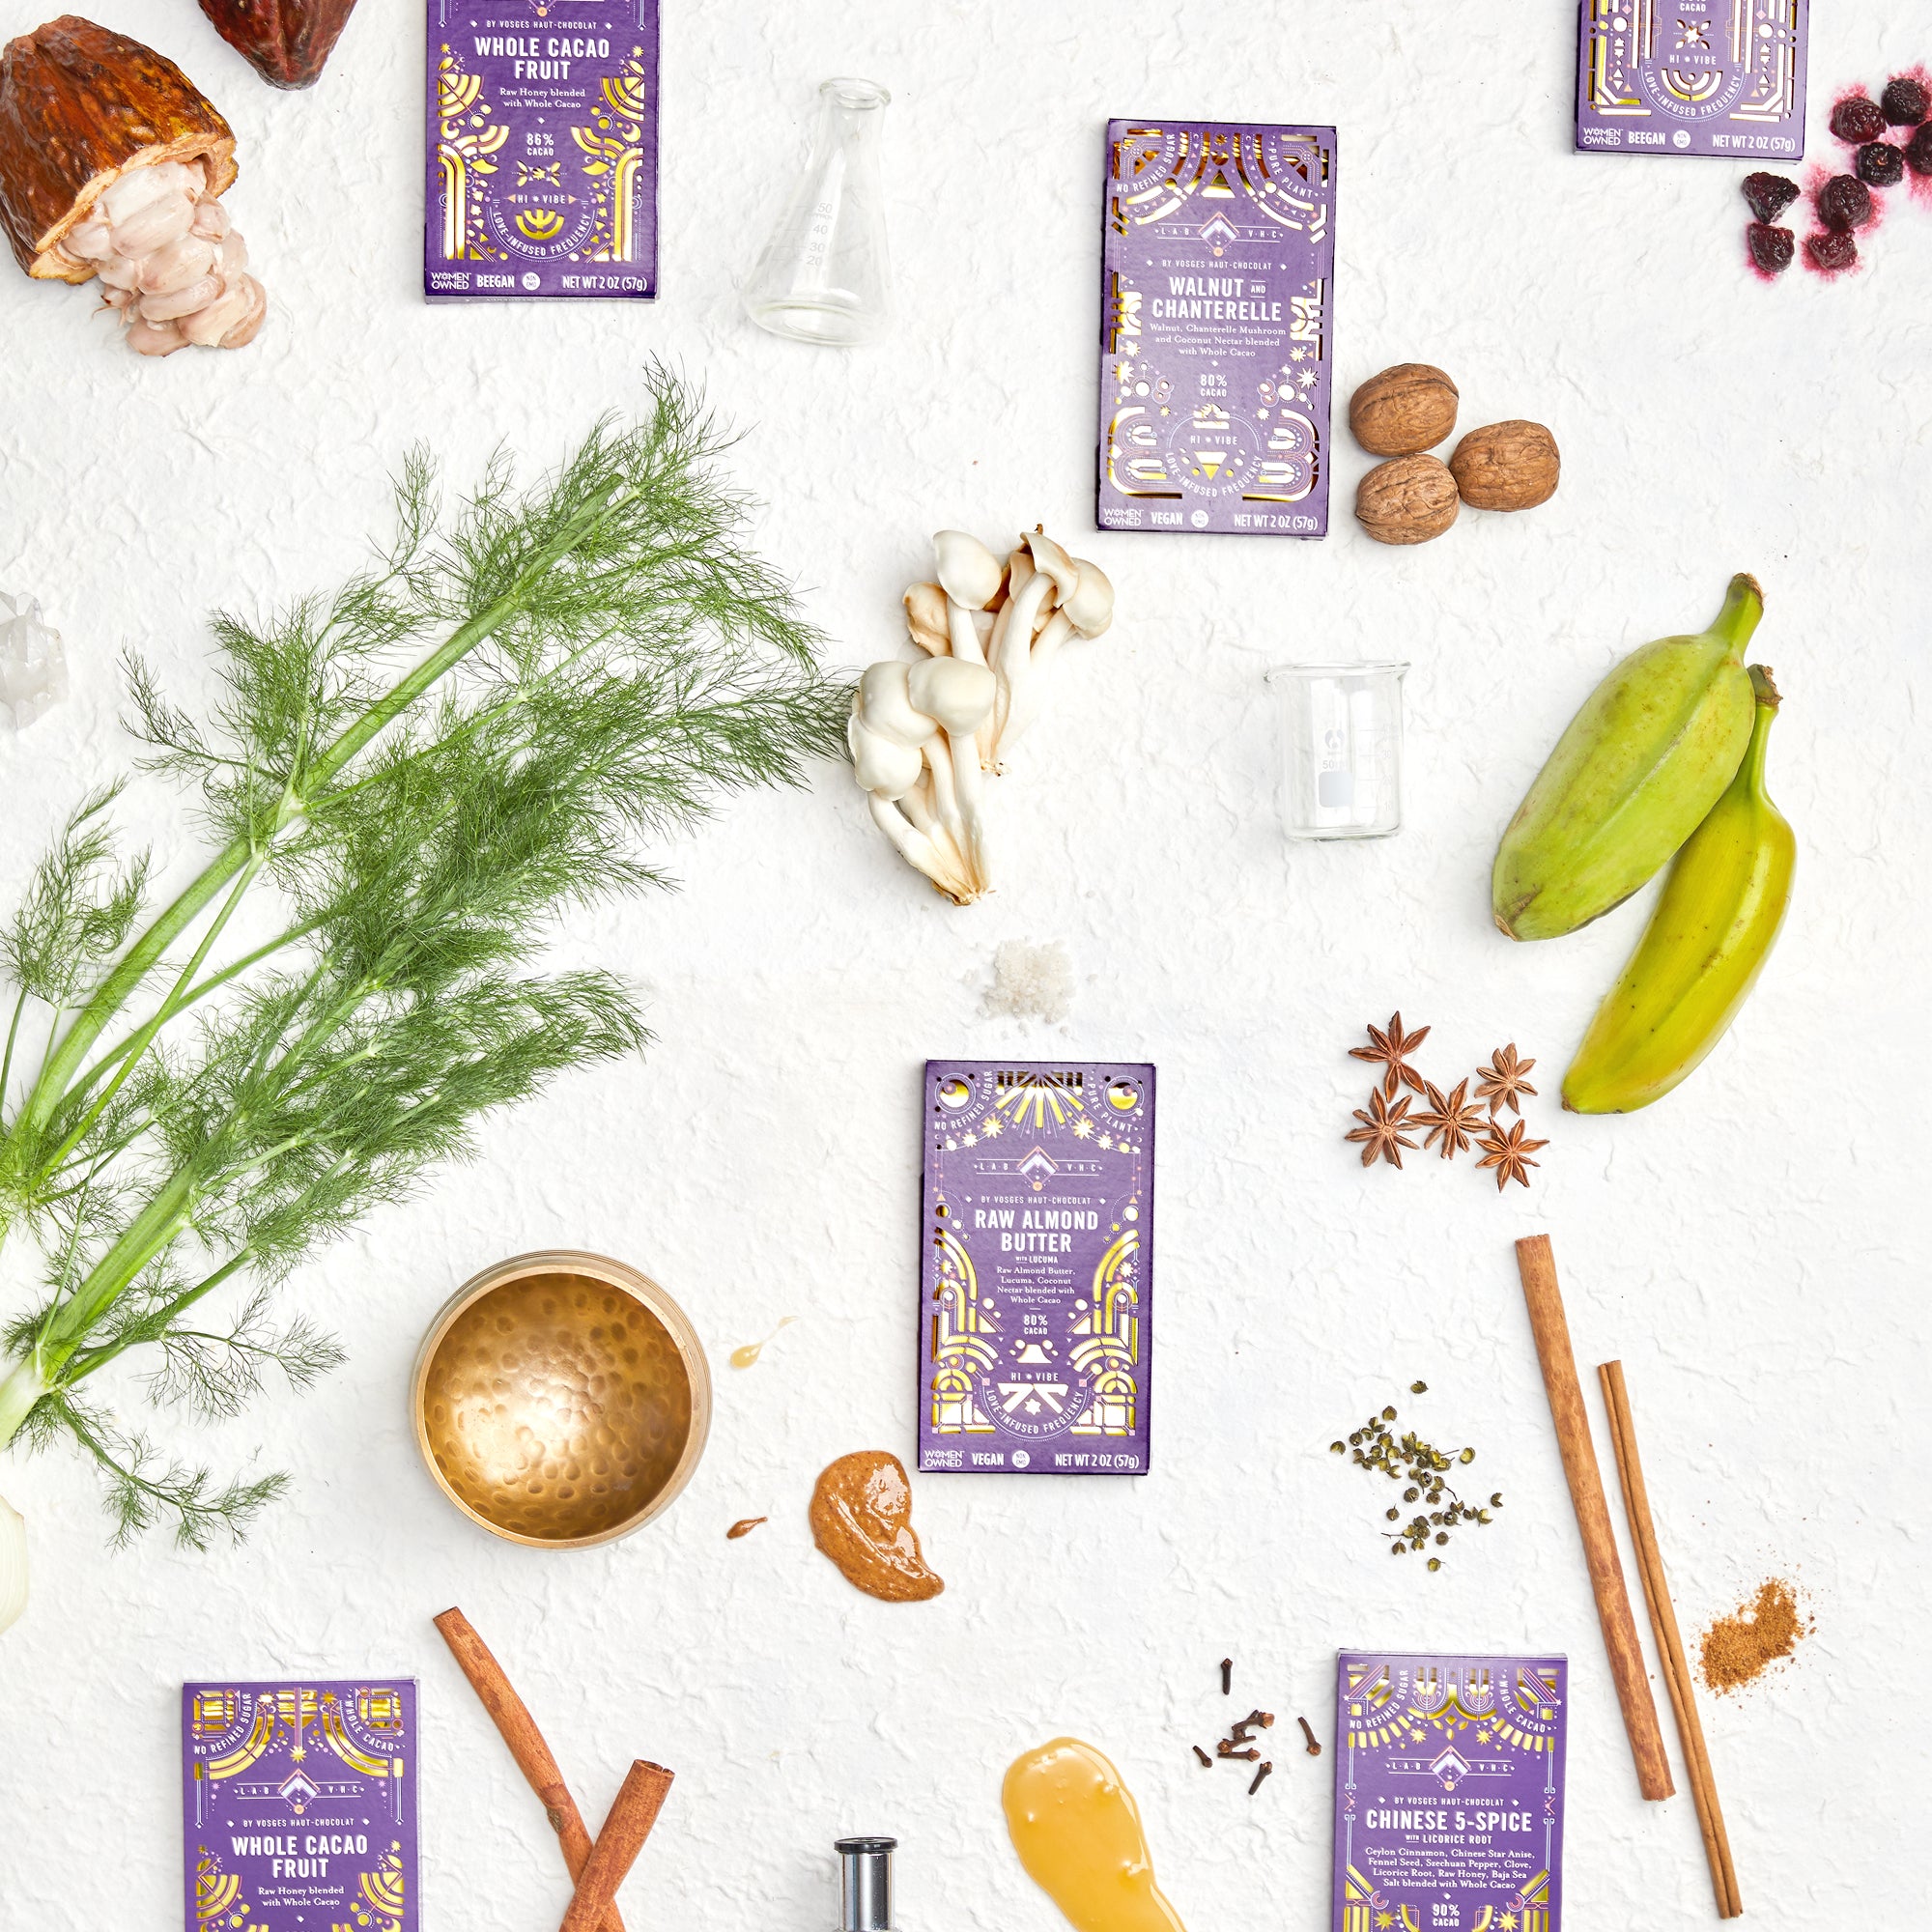 vosges-haut-chocolat-blog/healthy-holidays-101-nutrition-wellness-and-more